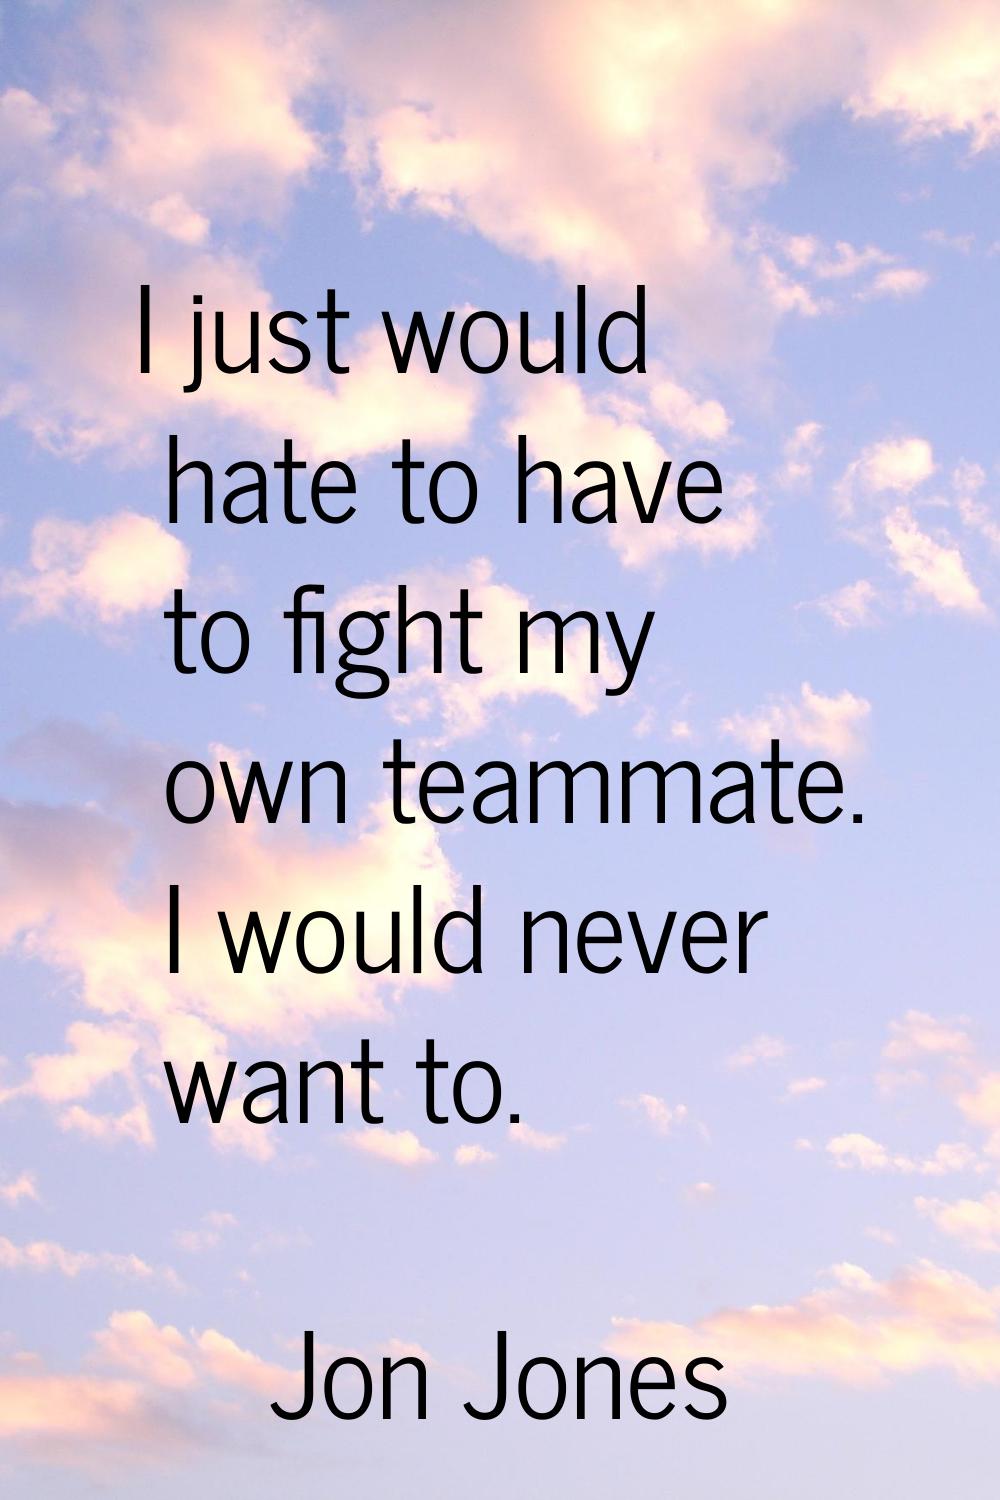 I just would hate to have to fight my own teammate. I would never want to.